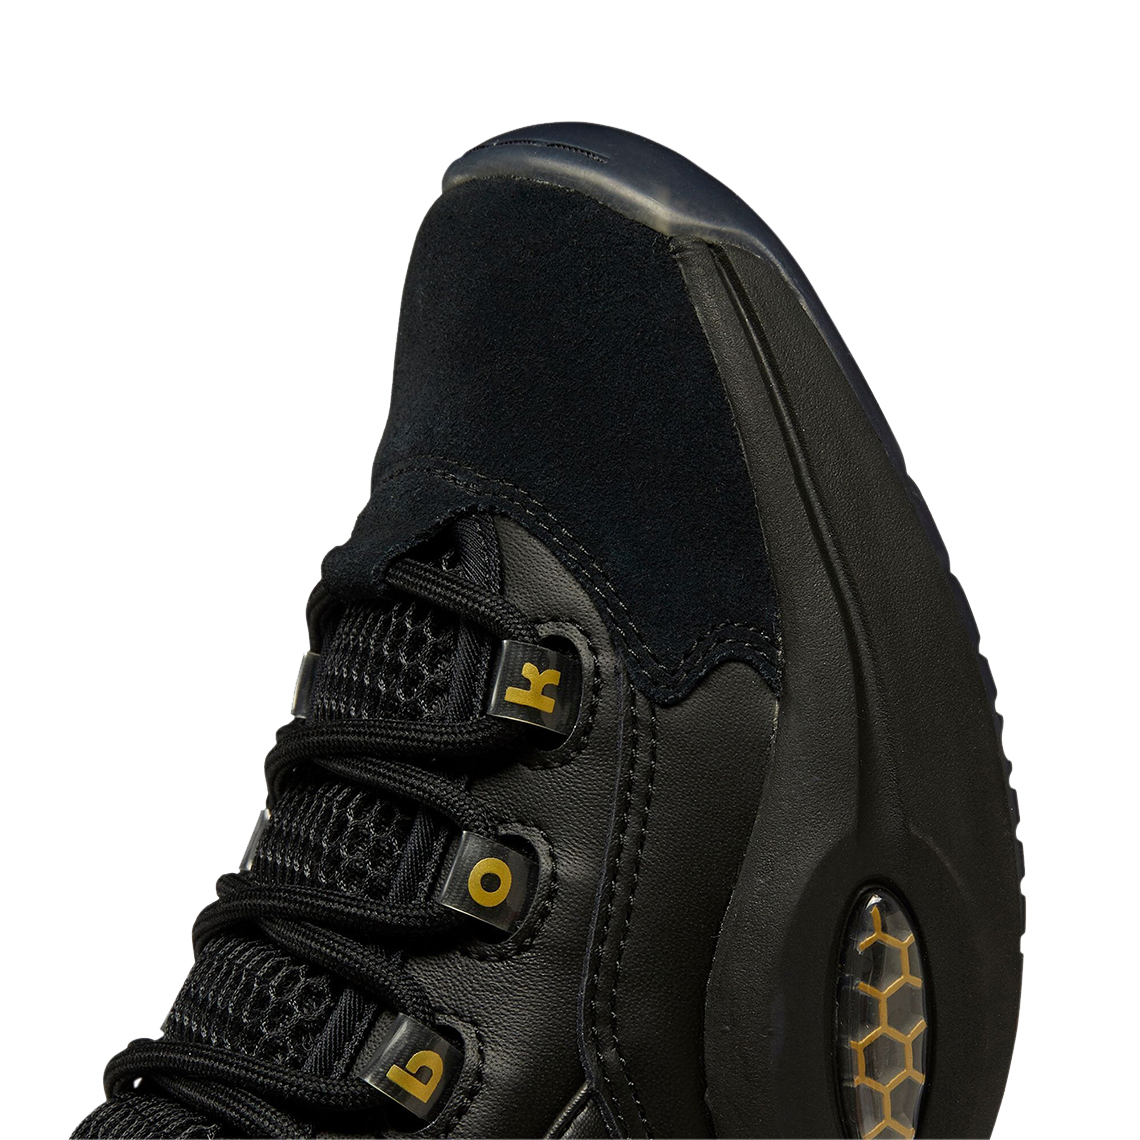 Reebok Question Mid Black Gold H01308 Release Date